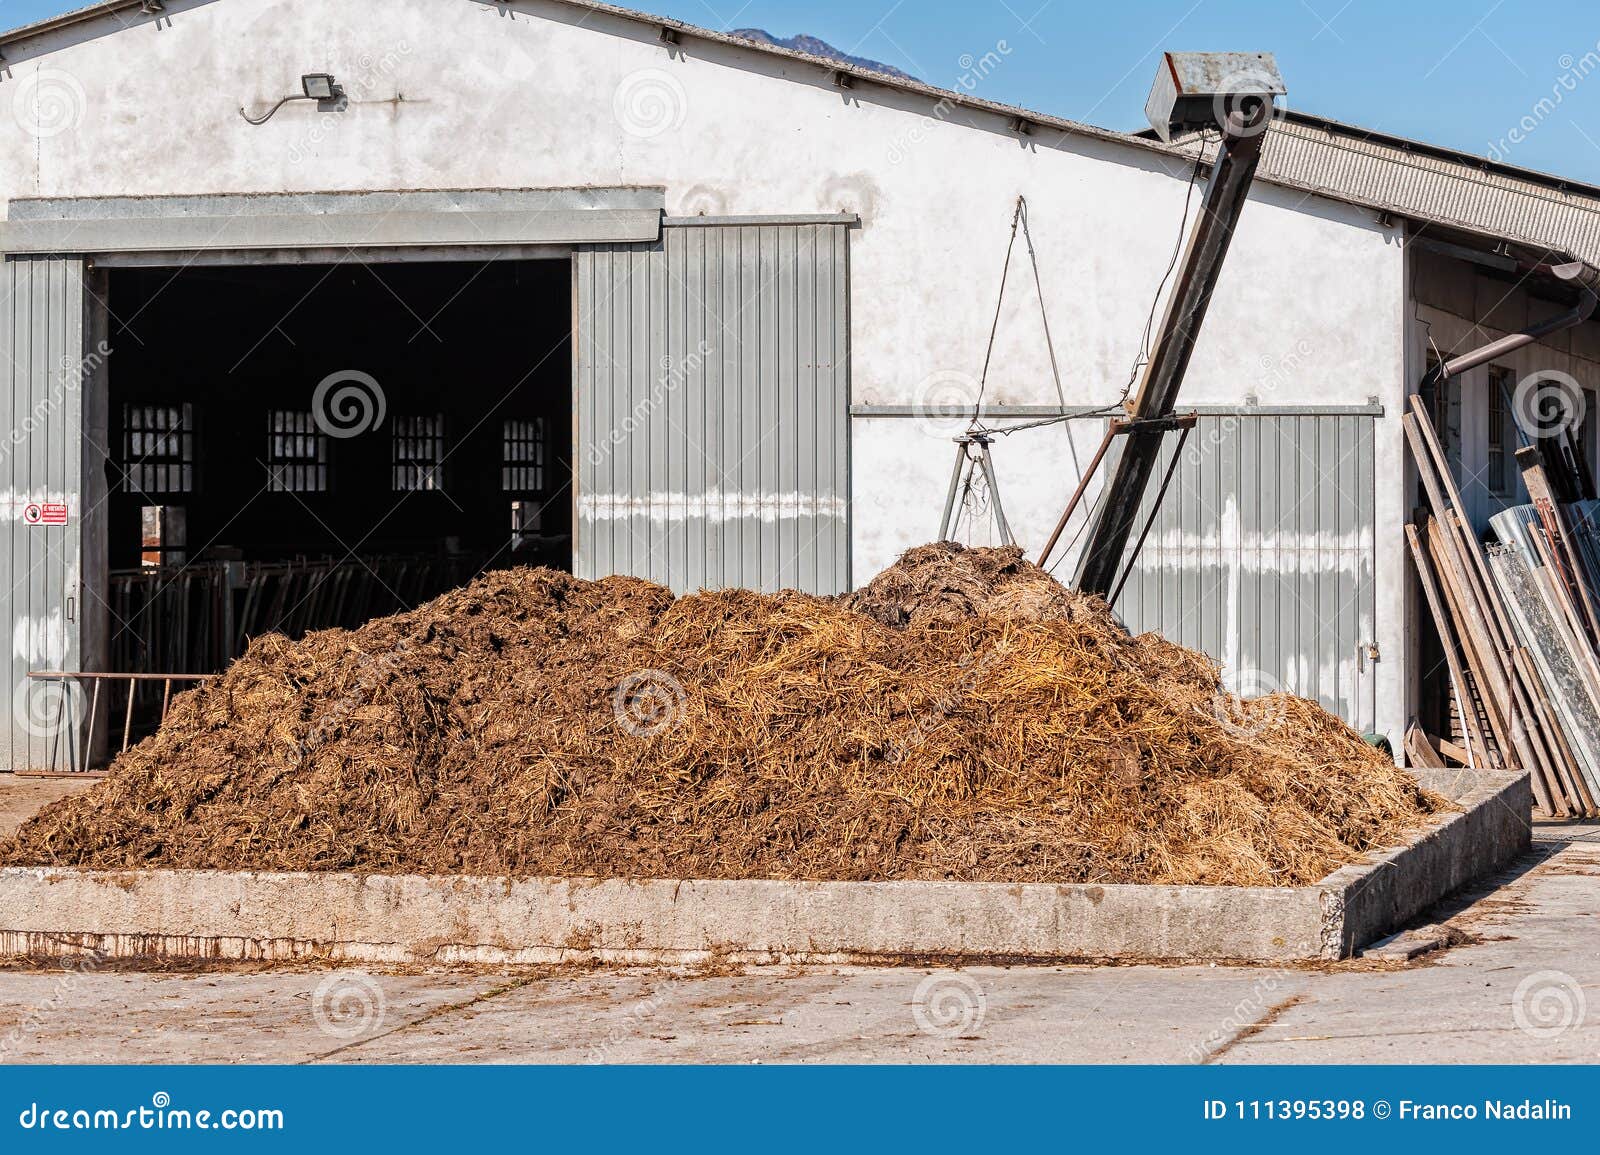 cow manure that will be used to fertilize.